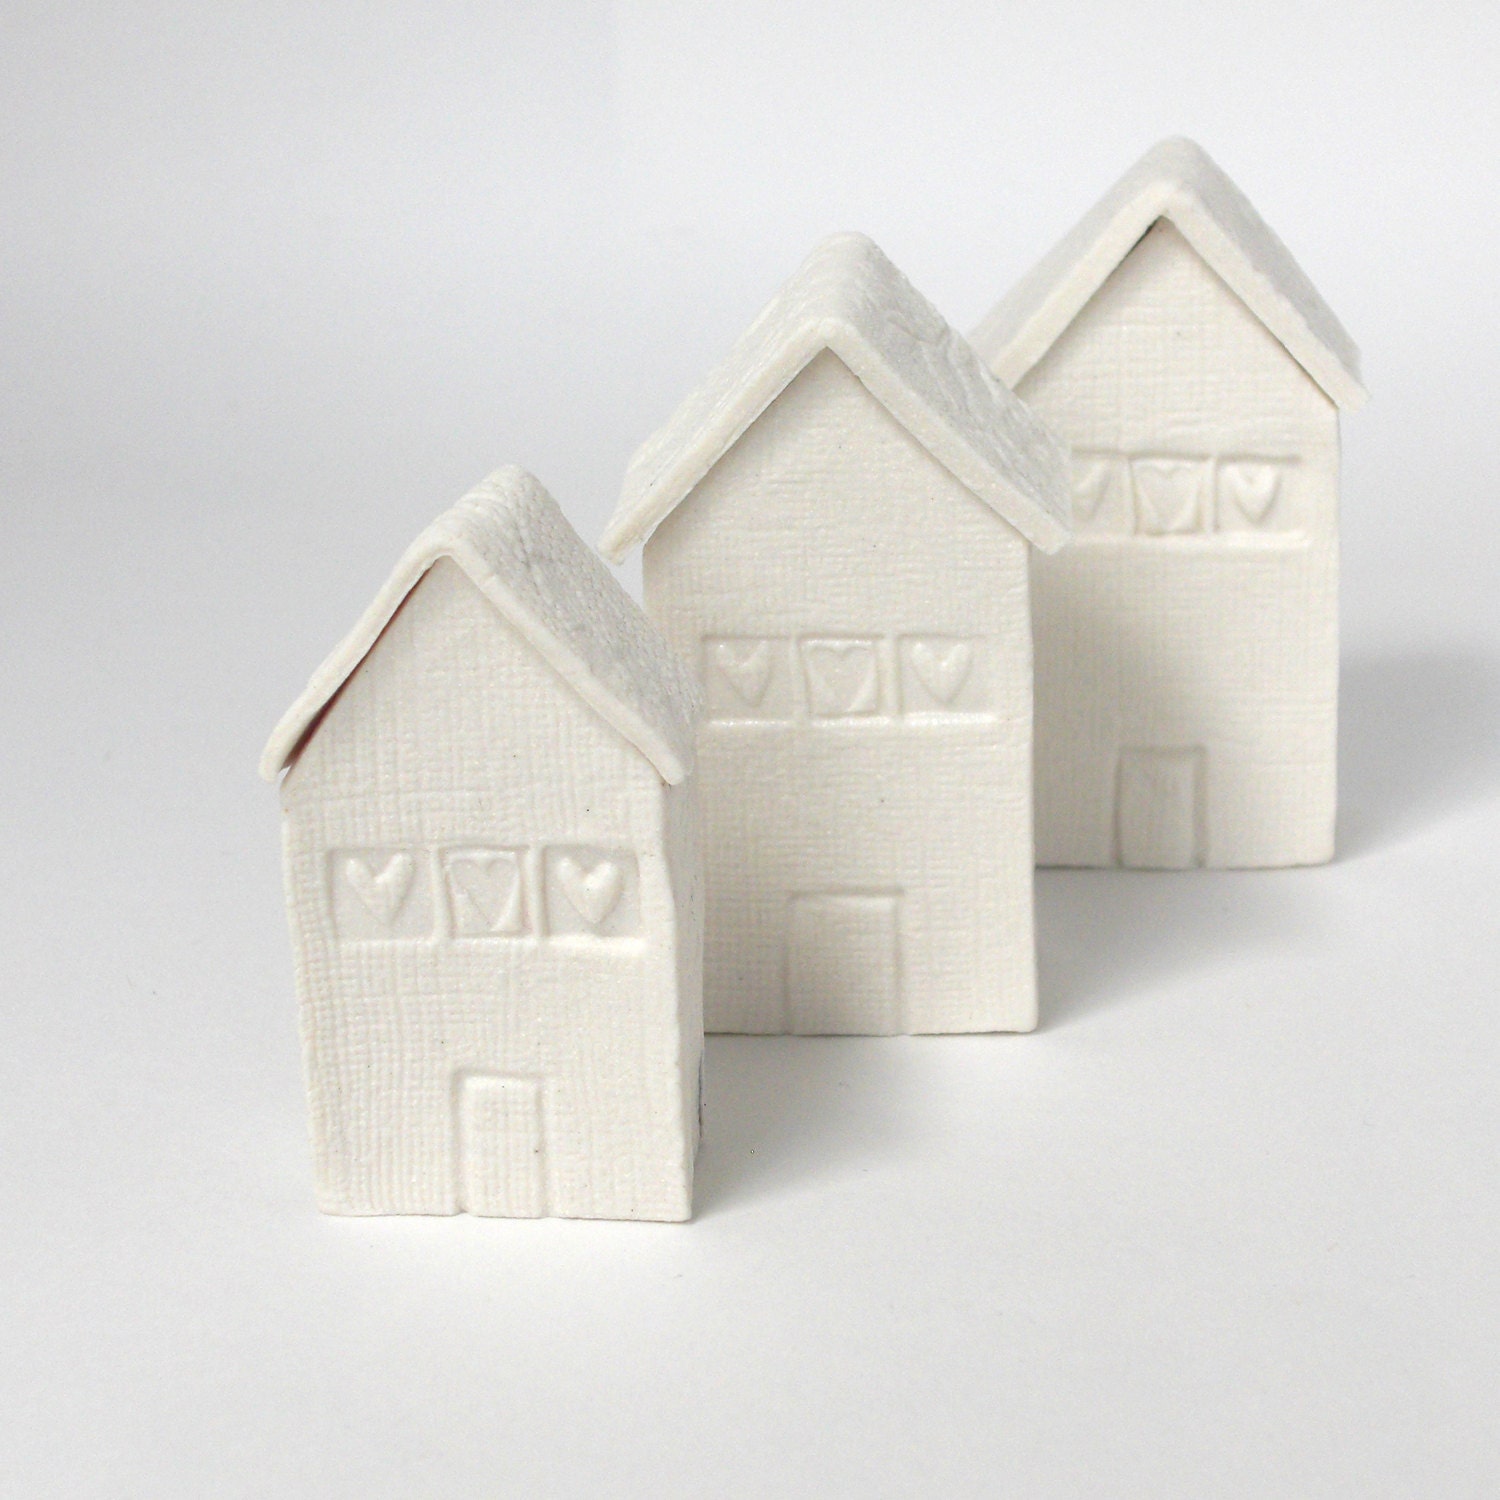 Miniature ceramic house jewellery box hand made in white porcelain, home sweet home, heart, soft red, pink, uk seller